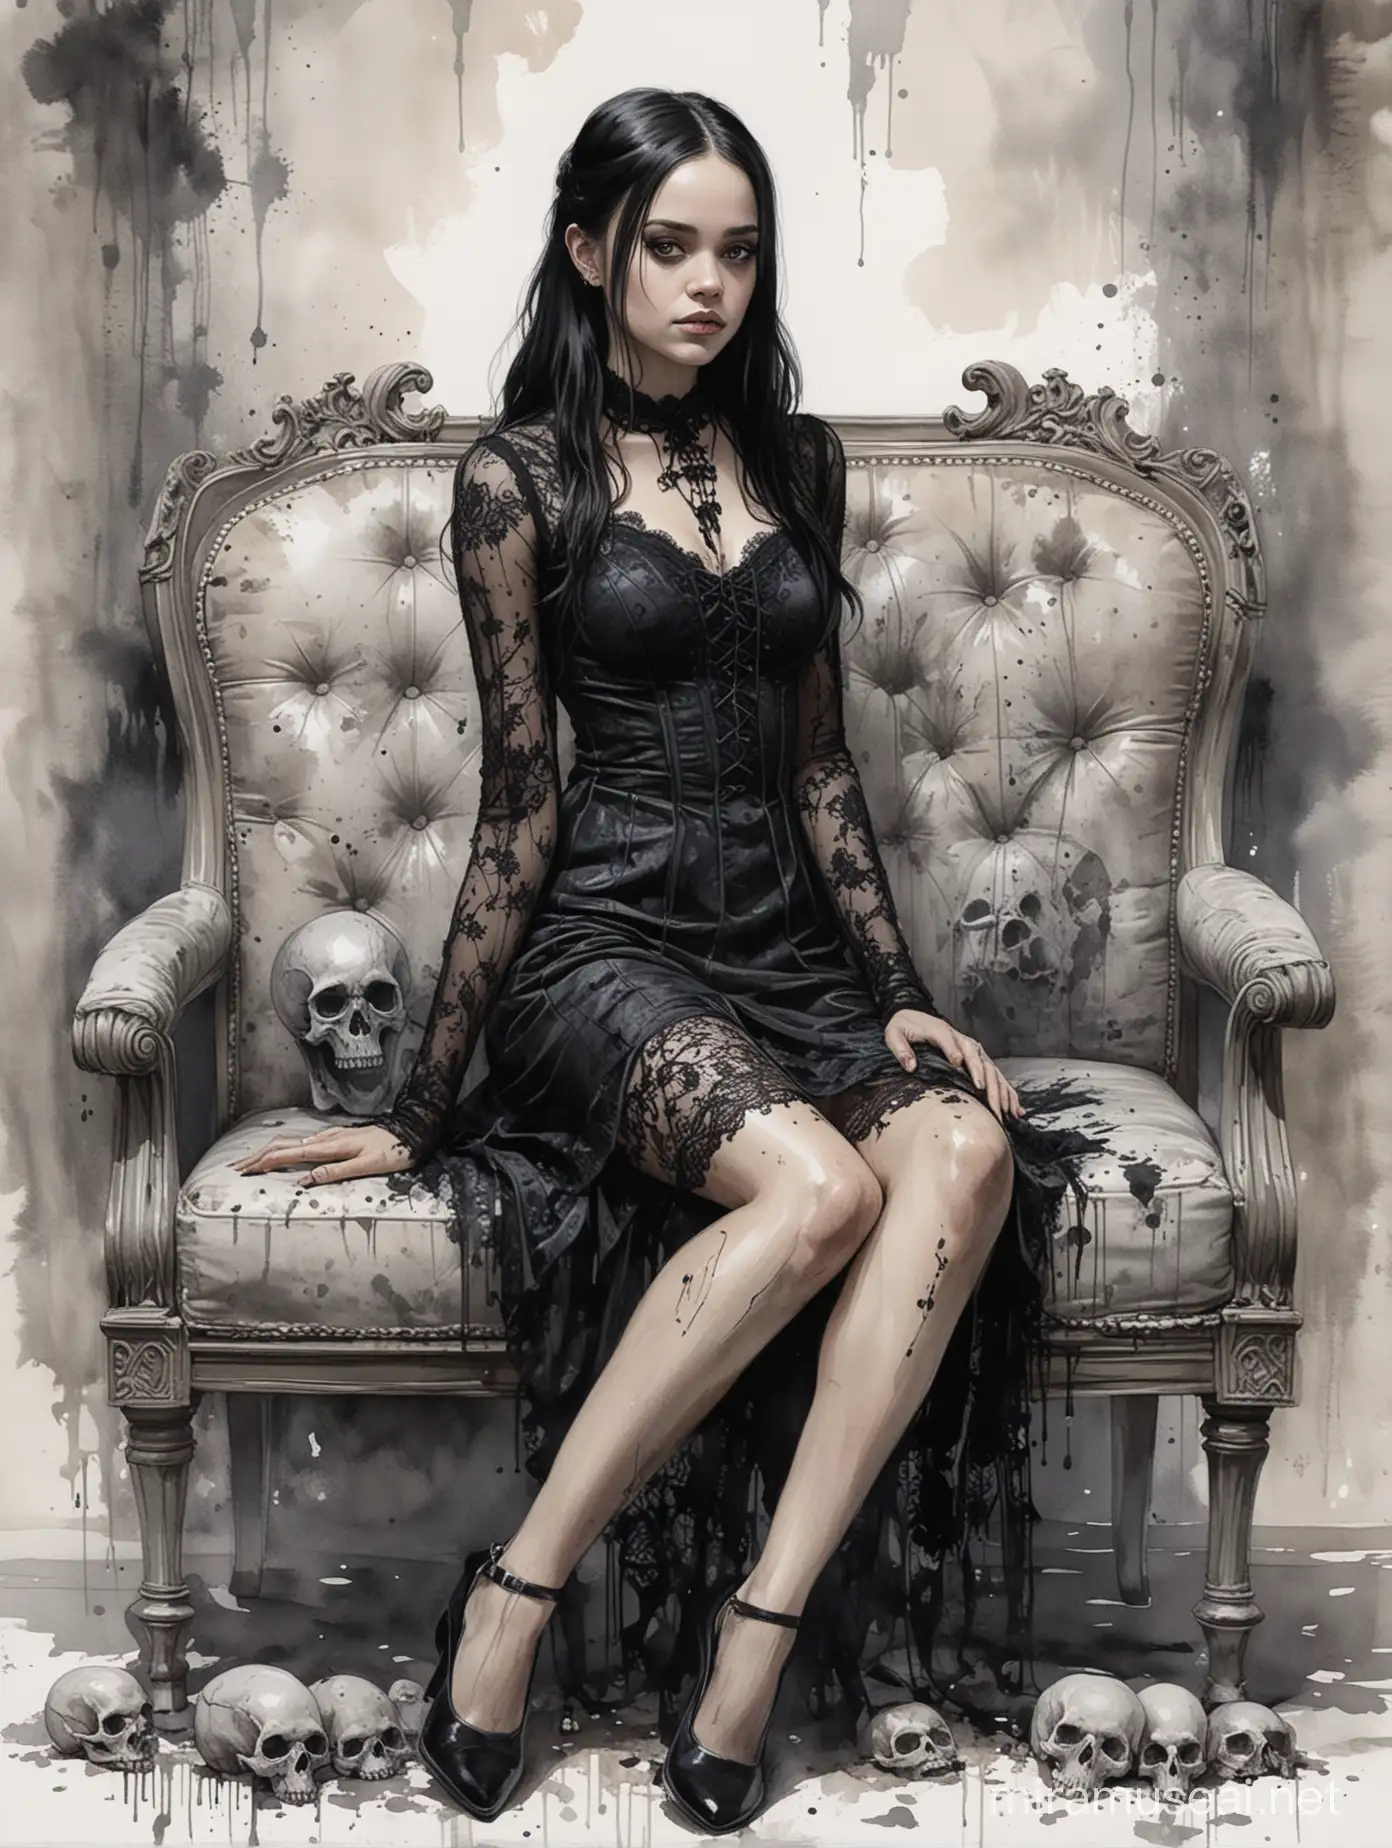 Gothic Jenna Ortega as Wednesday Addams on Rotting Couch